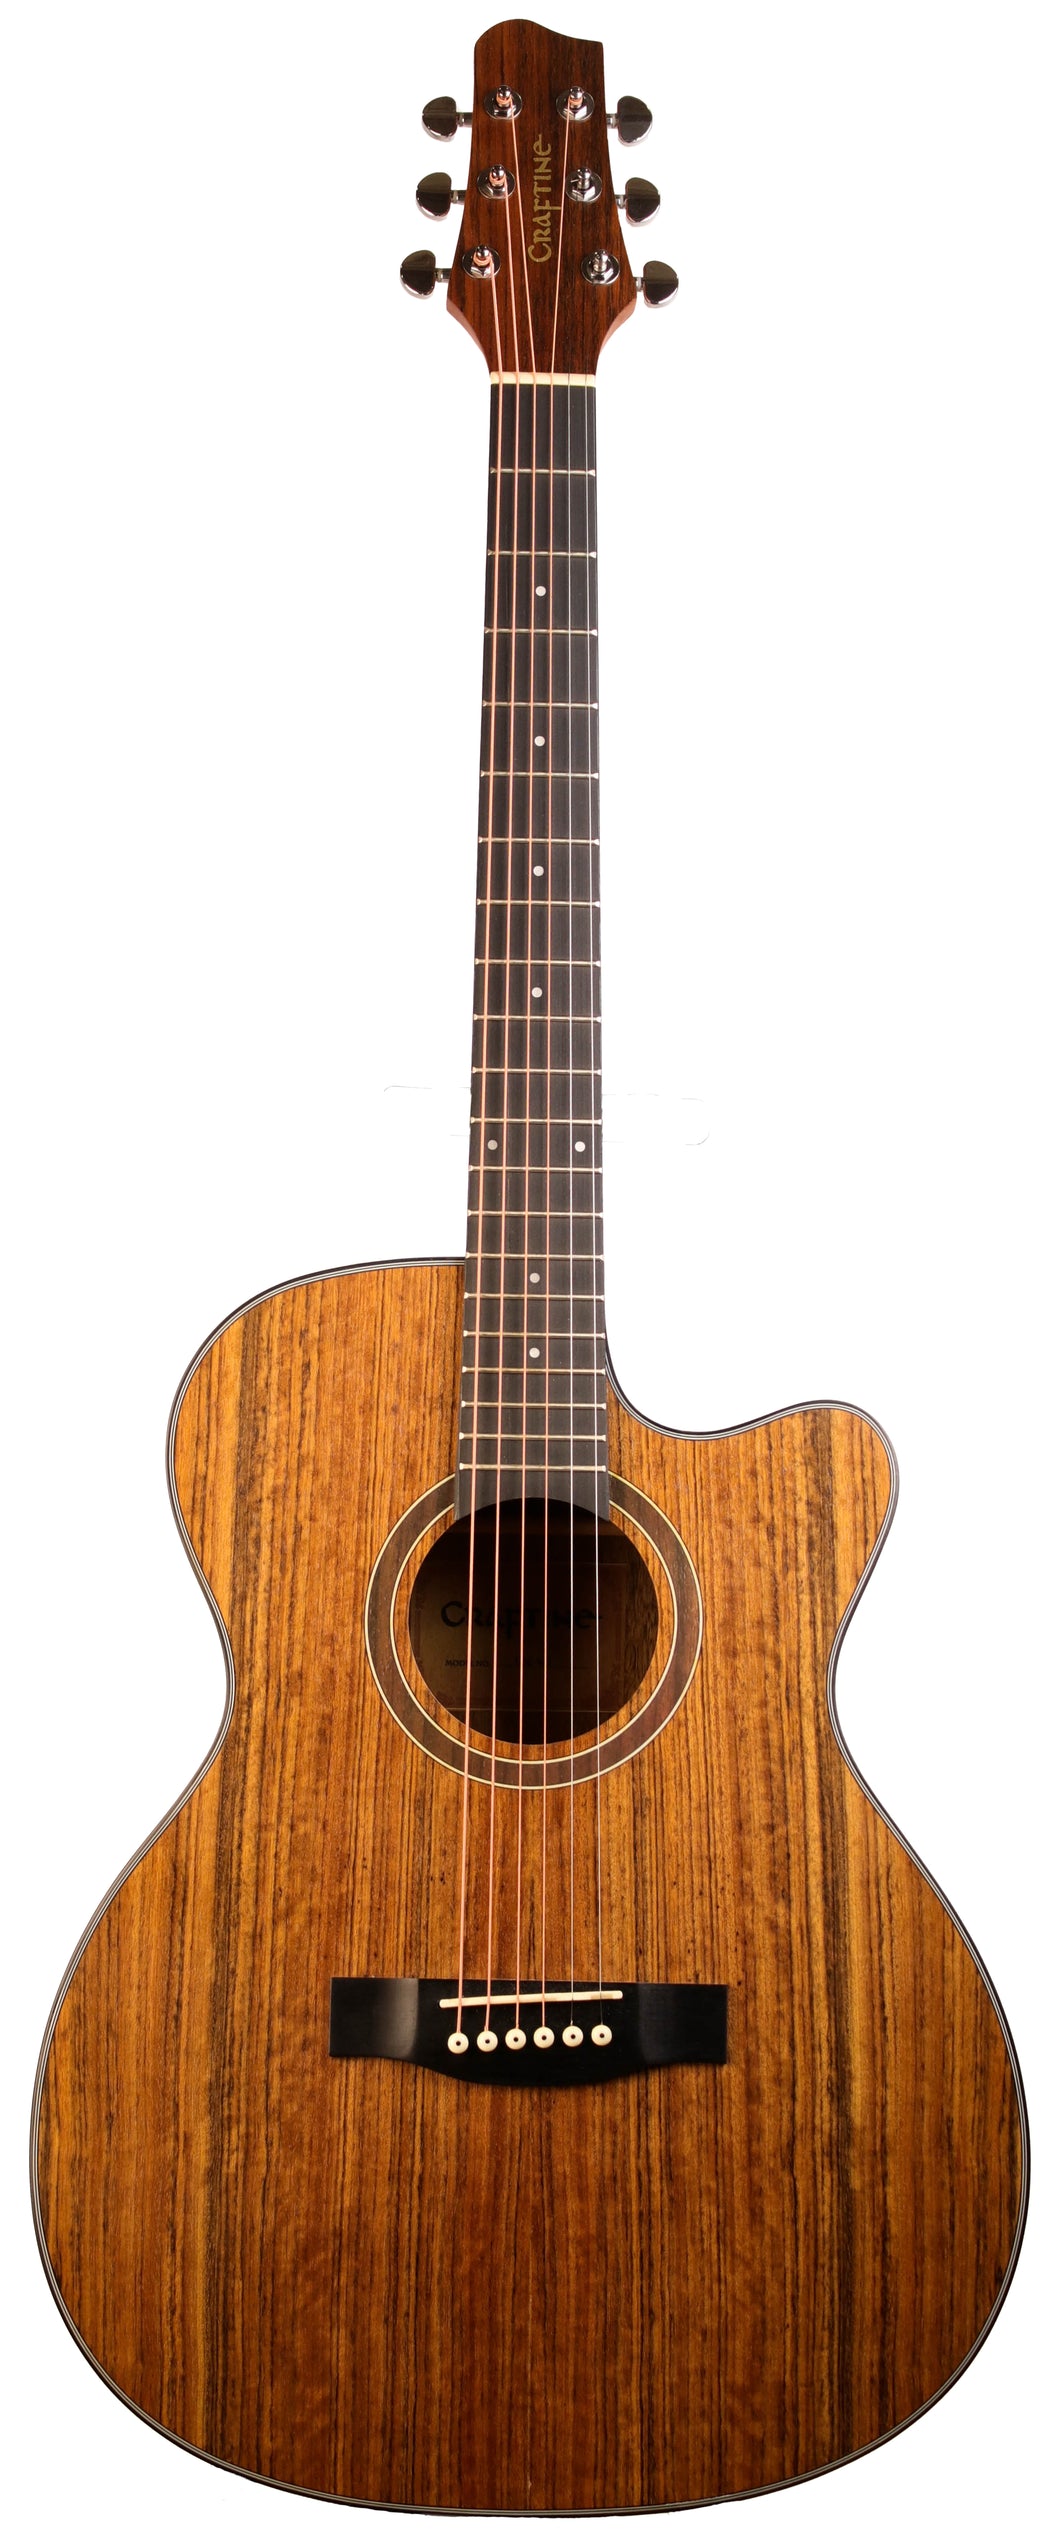 Craftine Concert Style Acoustic Guitar